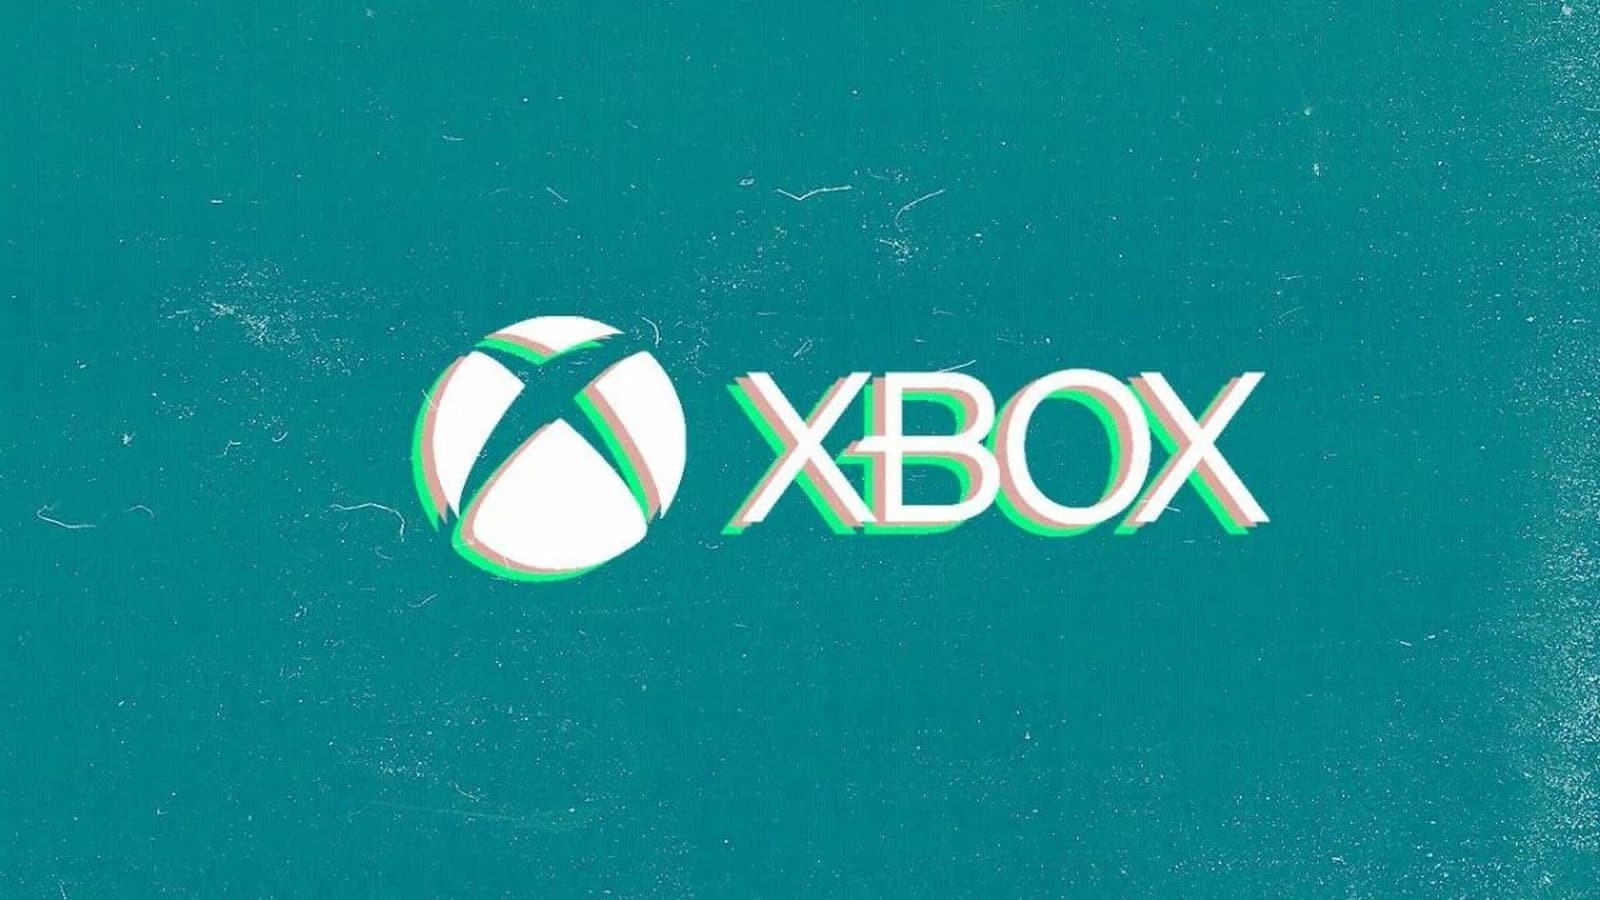 The Microsoft Gaming division's overall revenue was up by over 50% YoY.